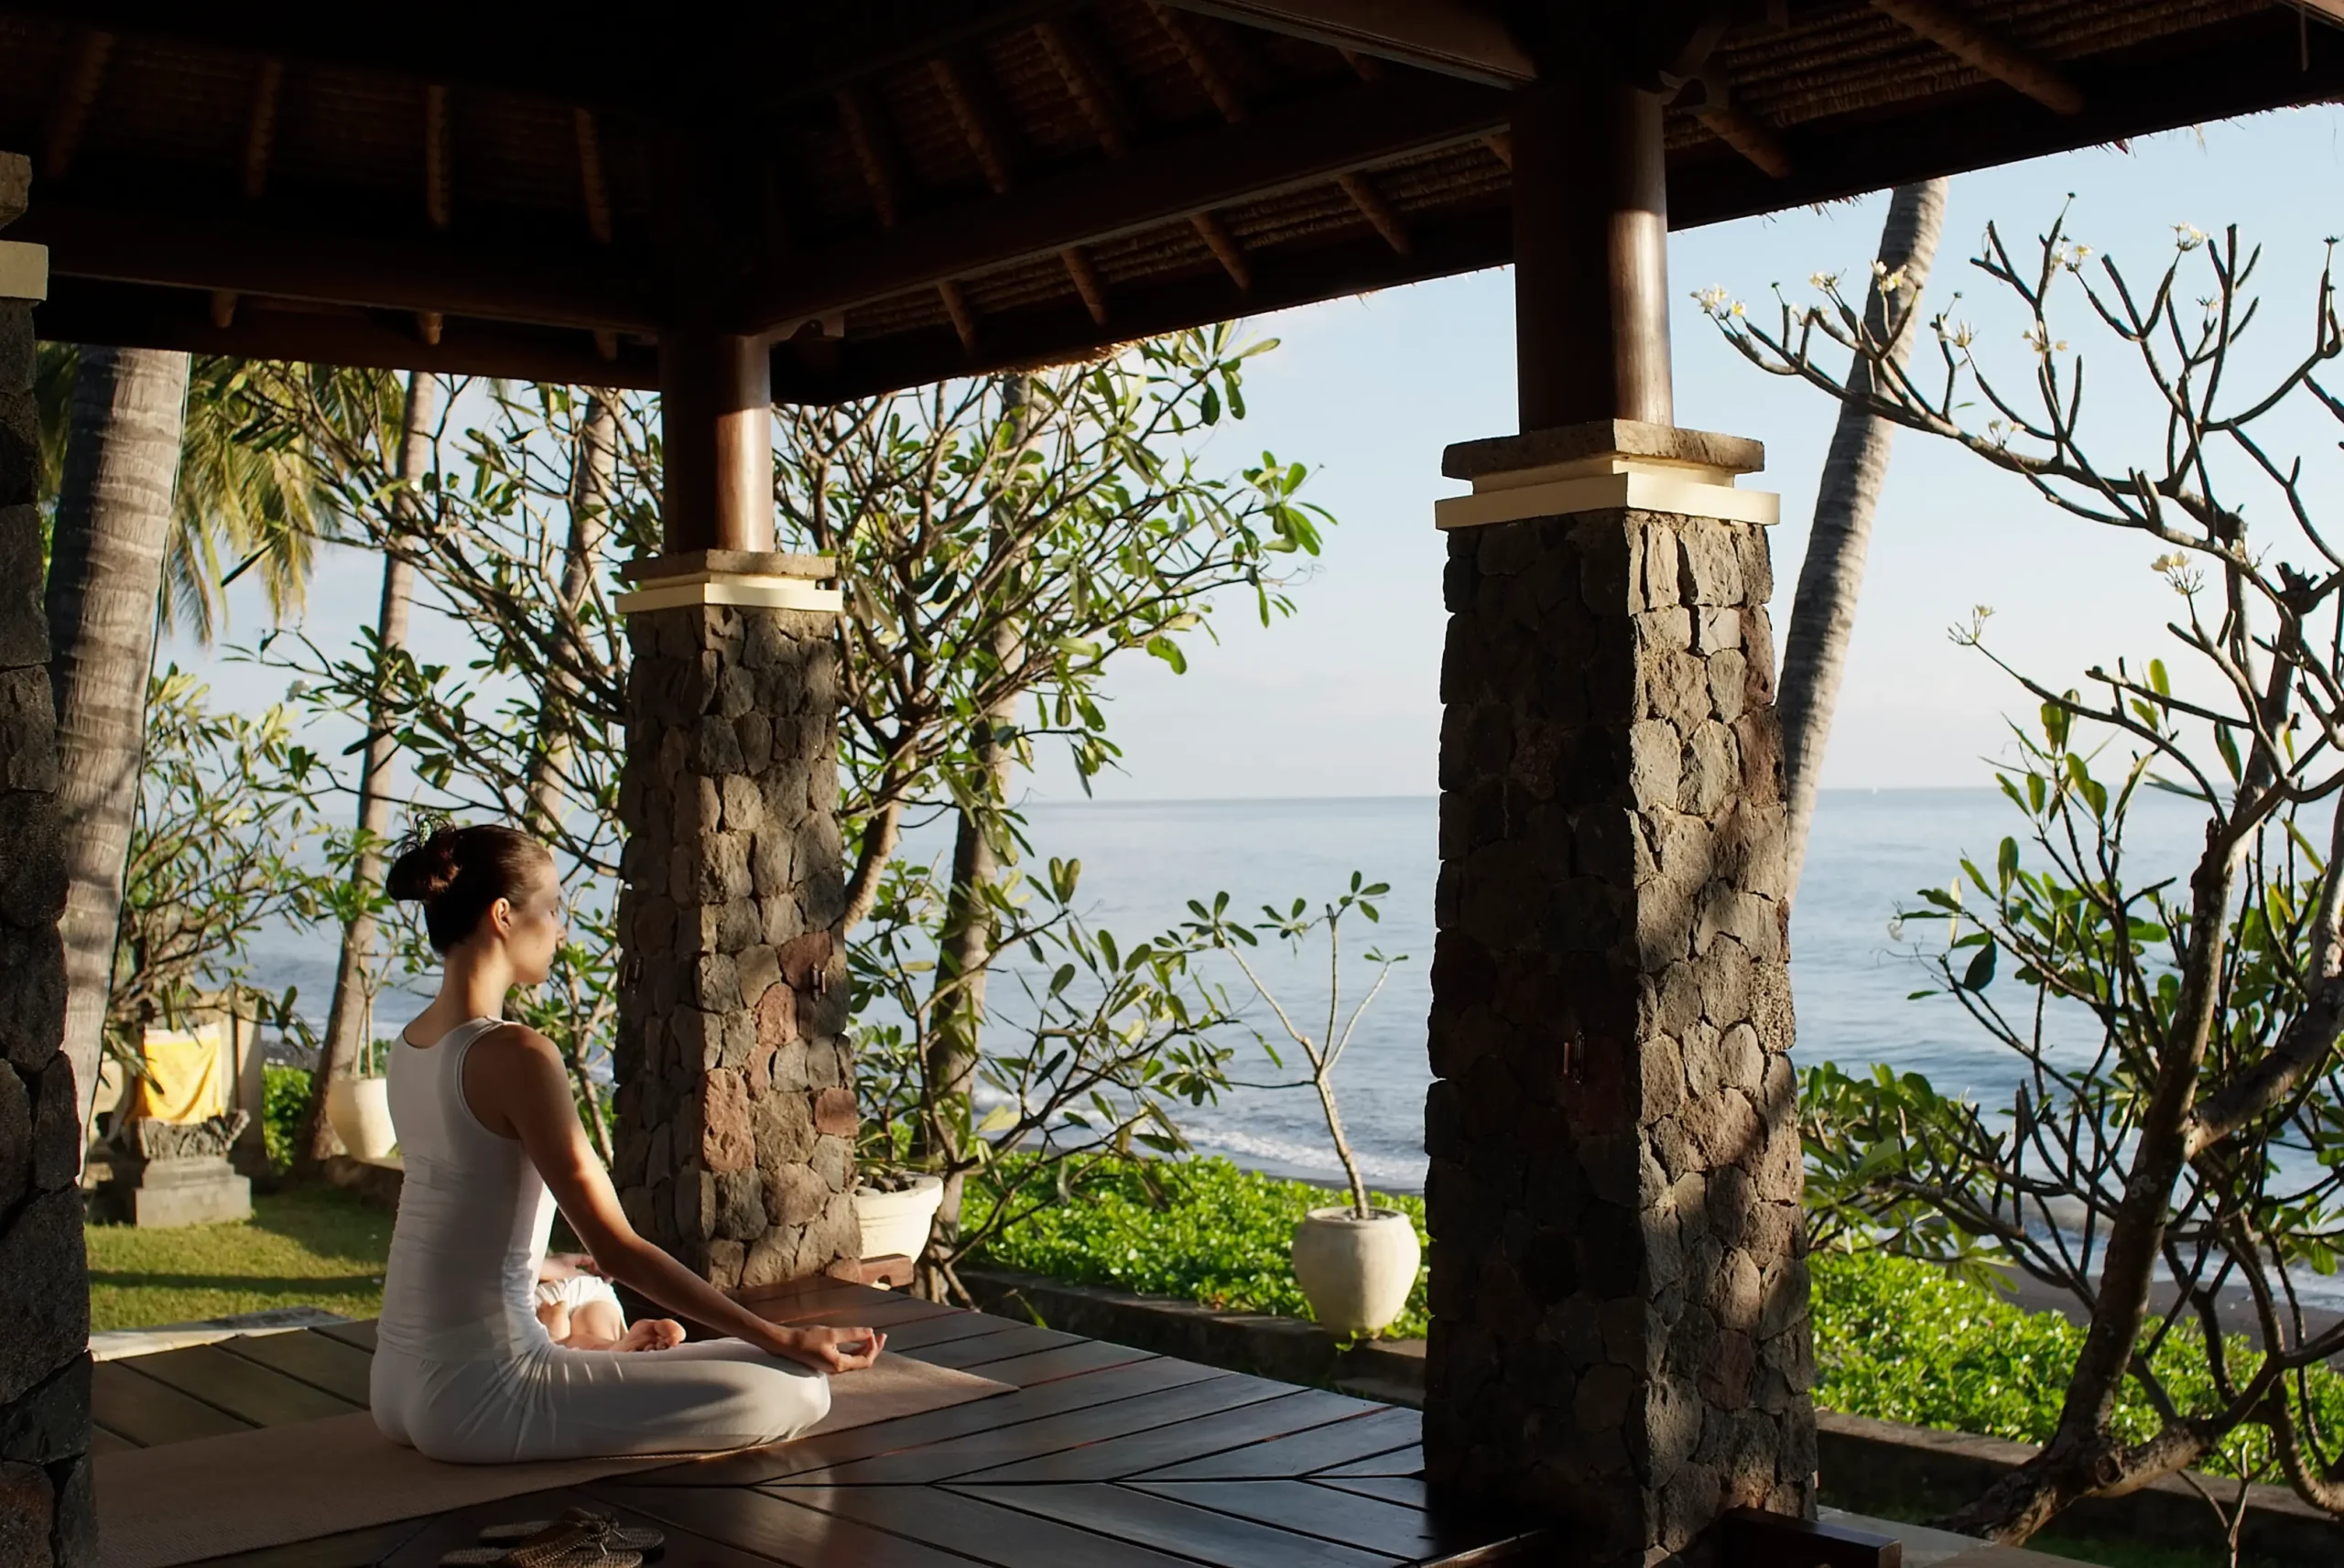 A woman in white yoga attire practices meditation at a wellness resort in Bali, within a seaside yoga pavilion.